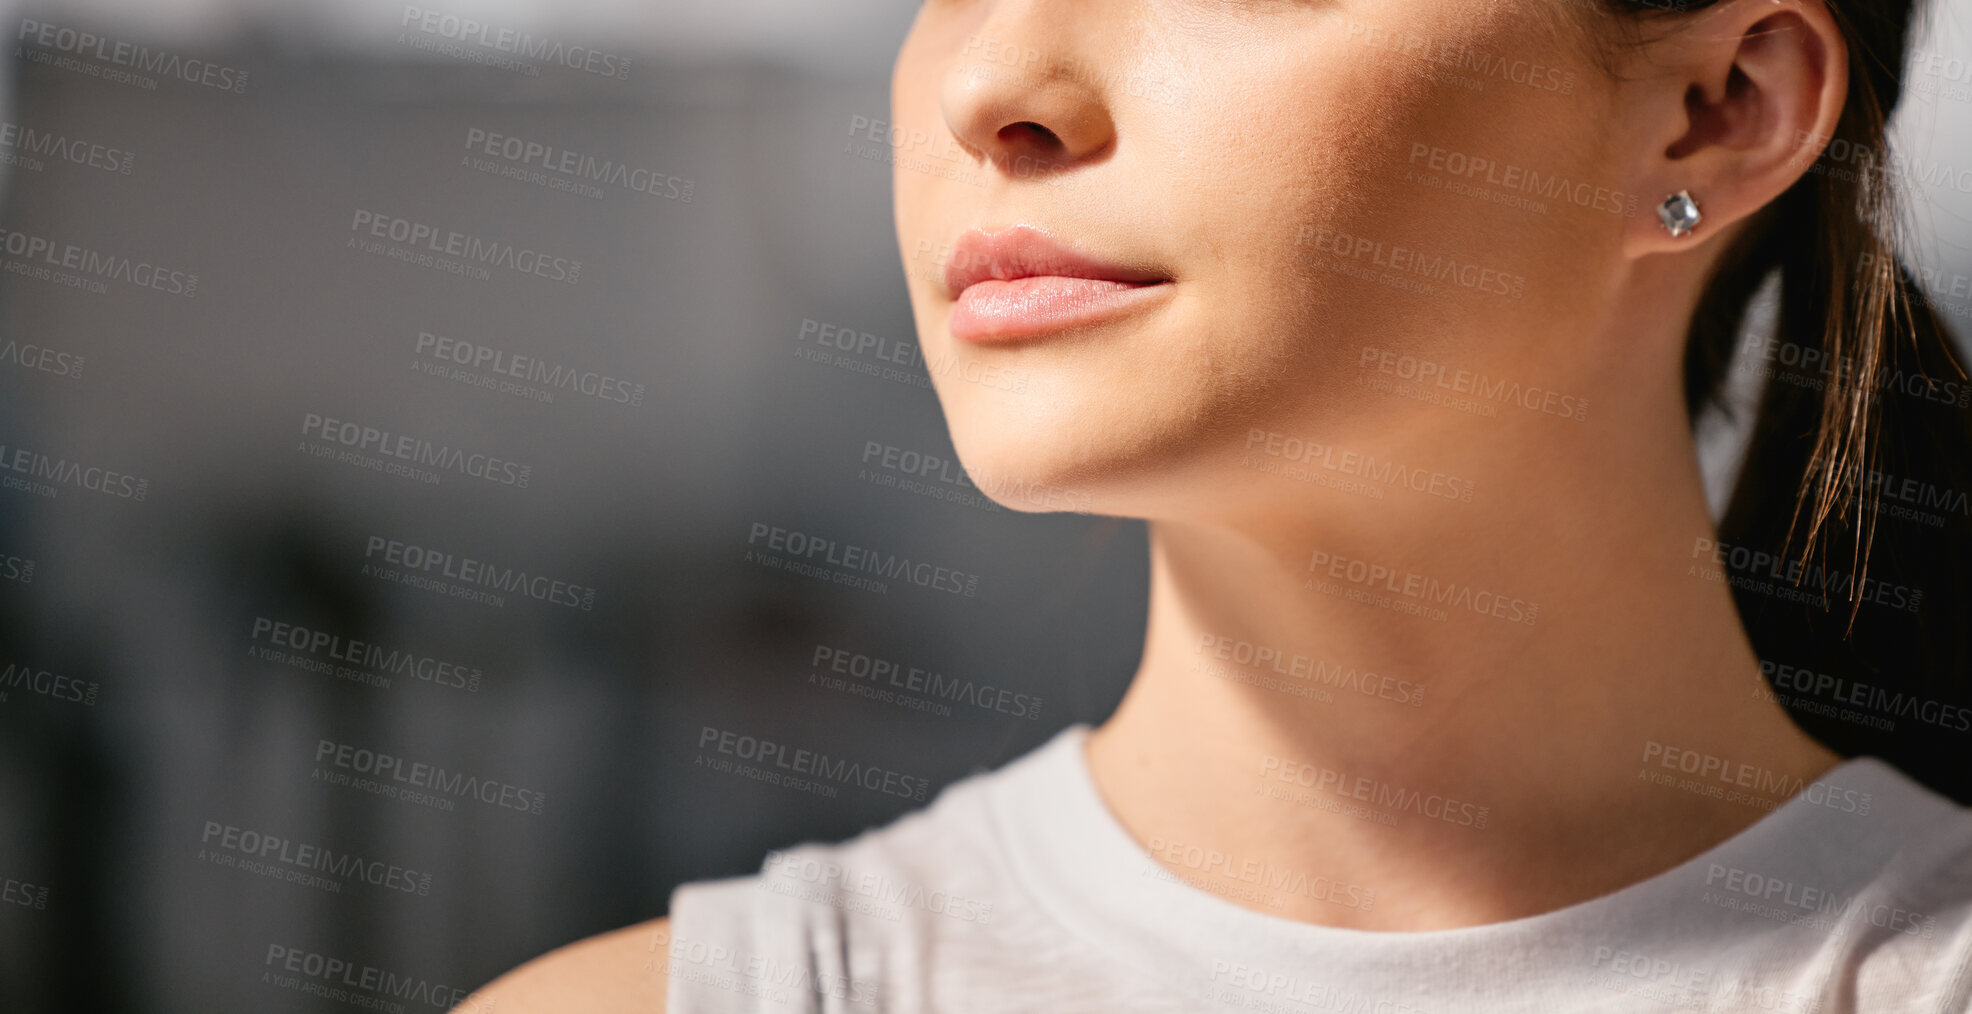 Buy stock photo Closeup of one focused caucasian woman exercising in a gym with copyspace on the side. Face of a determined and motivated female athlete with healthy skin looking thoughtful in a fitness centre